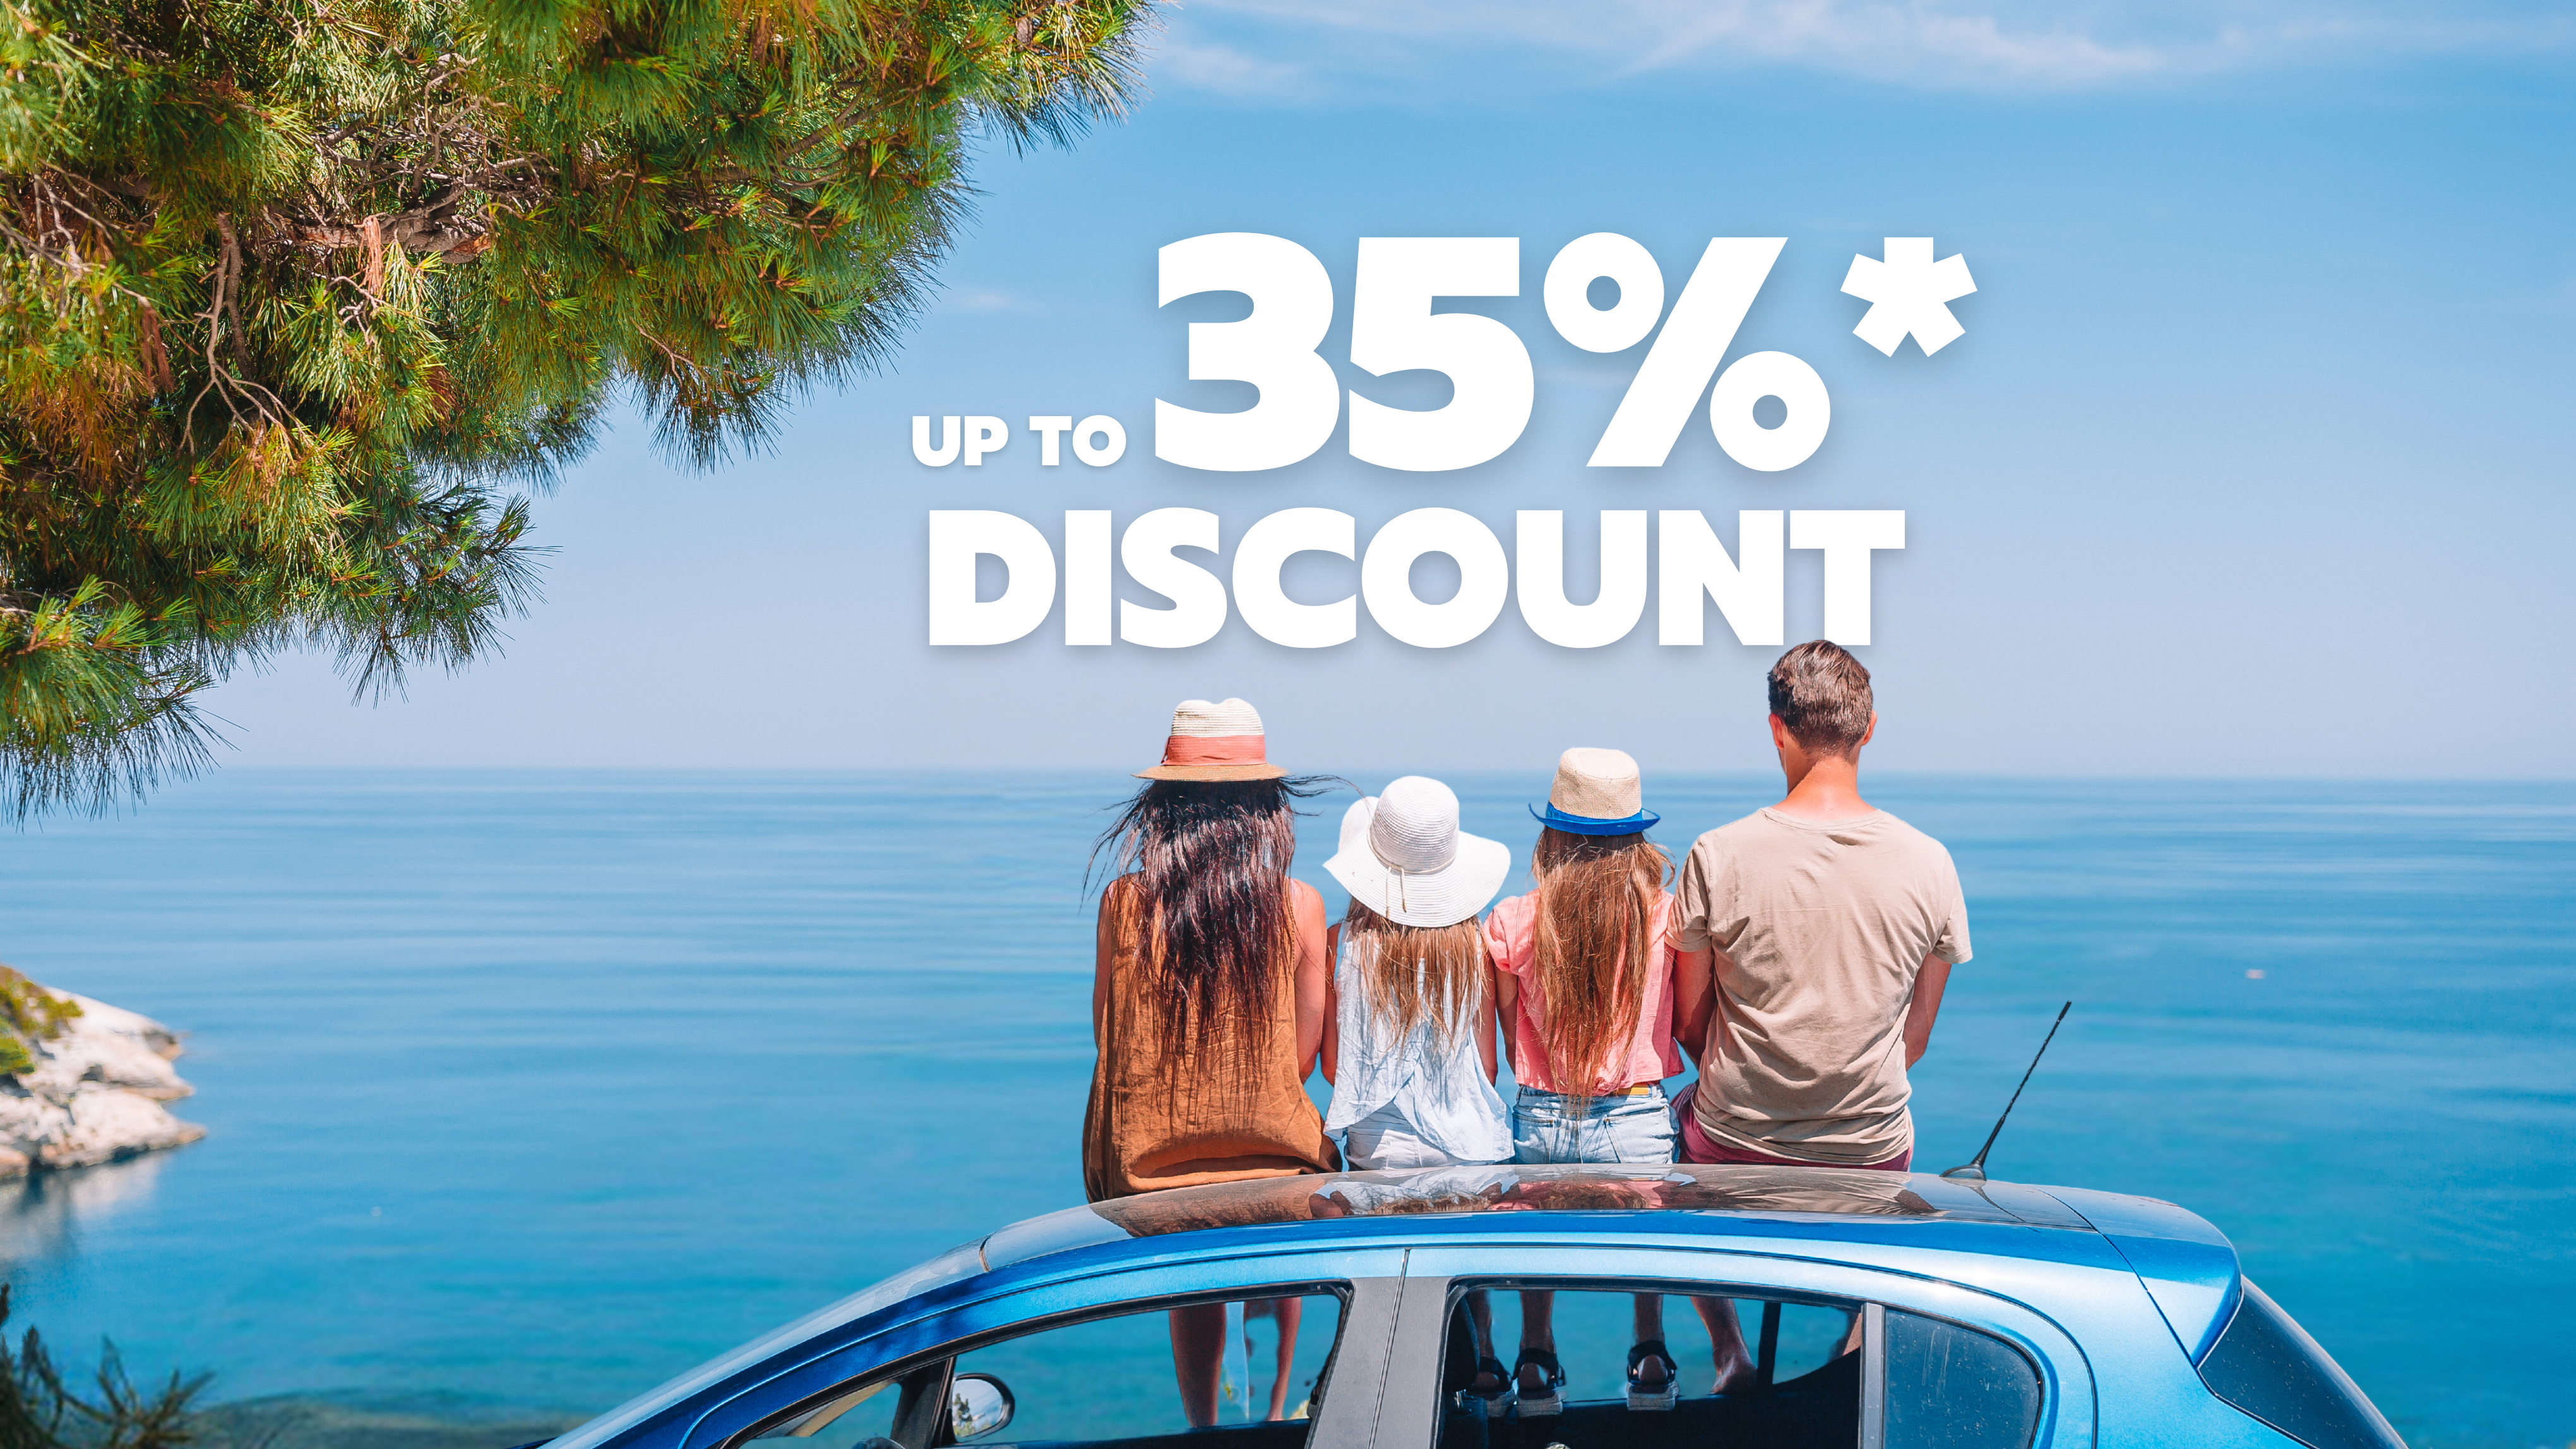 ENJOY UP TO A 35% DISCOUNT